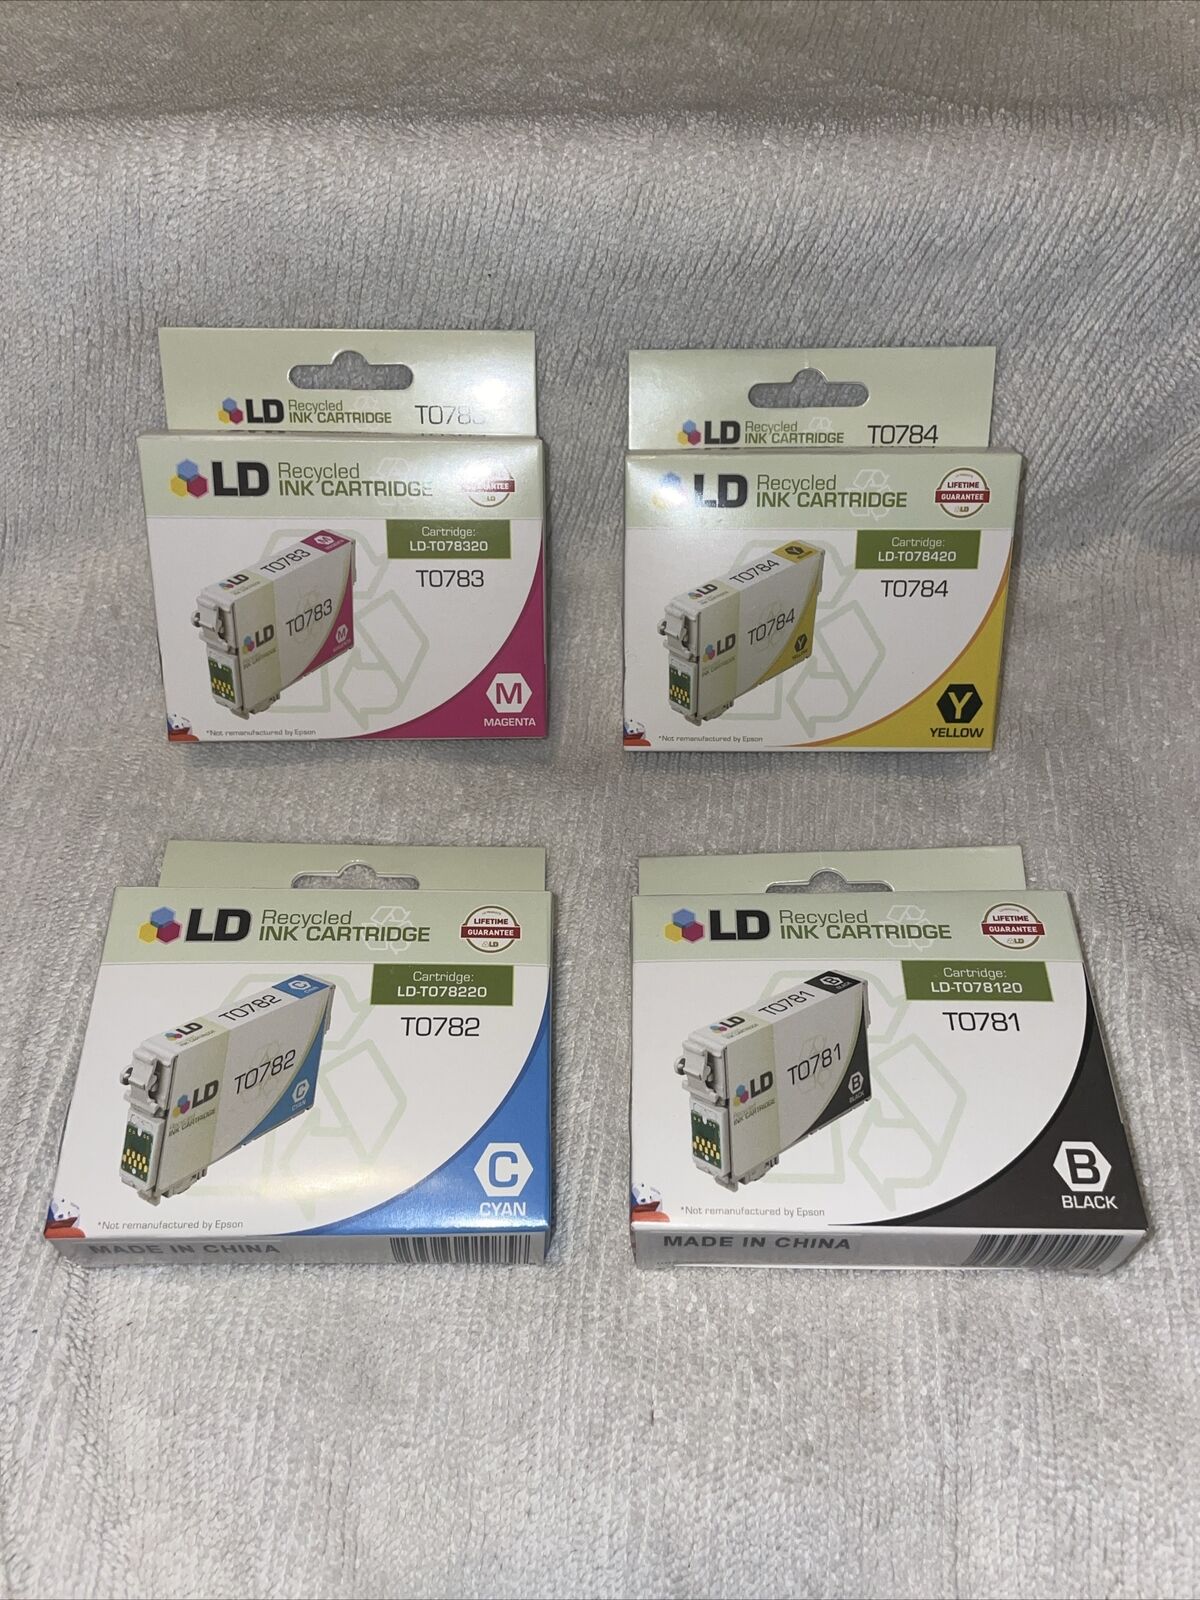 New Sealed LD recycled ink cartridge Black Magenta Yellow Cyan T0781-T0784 Epson